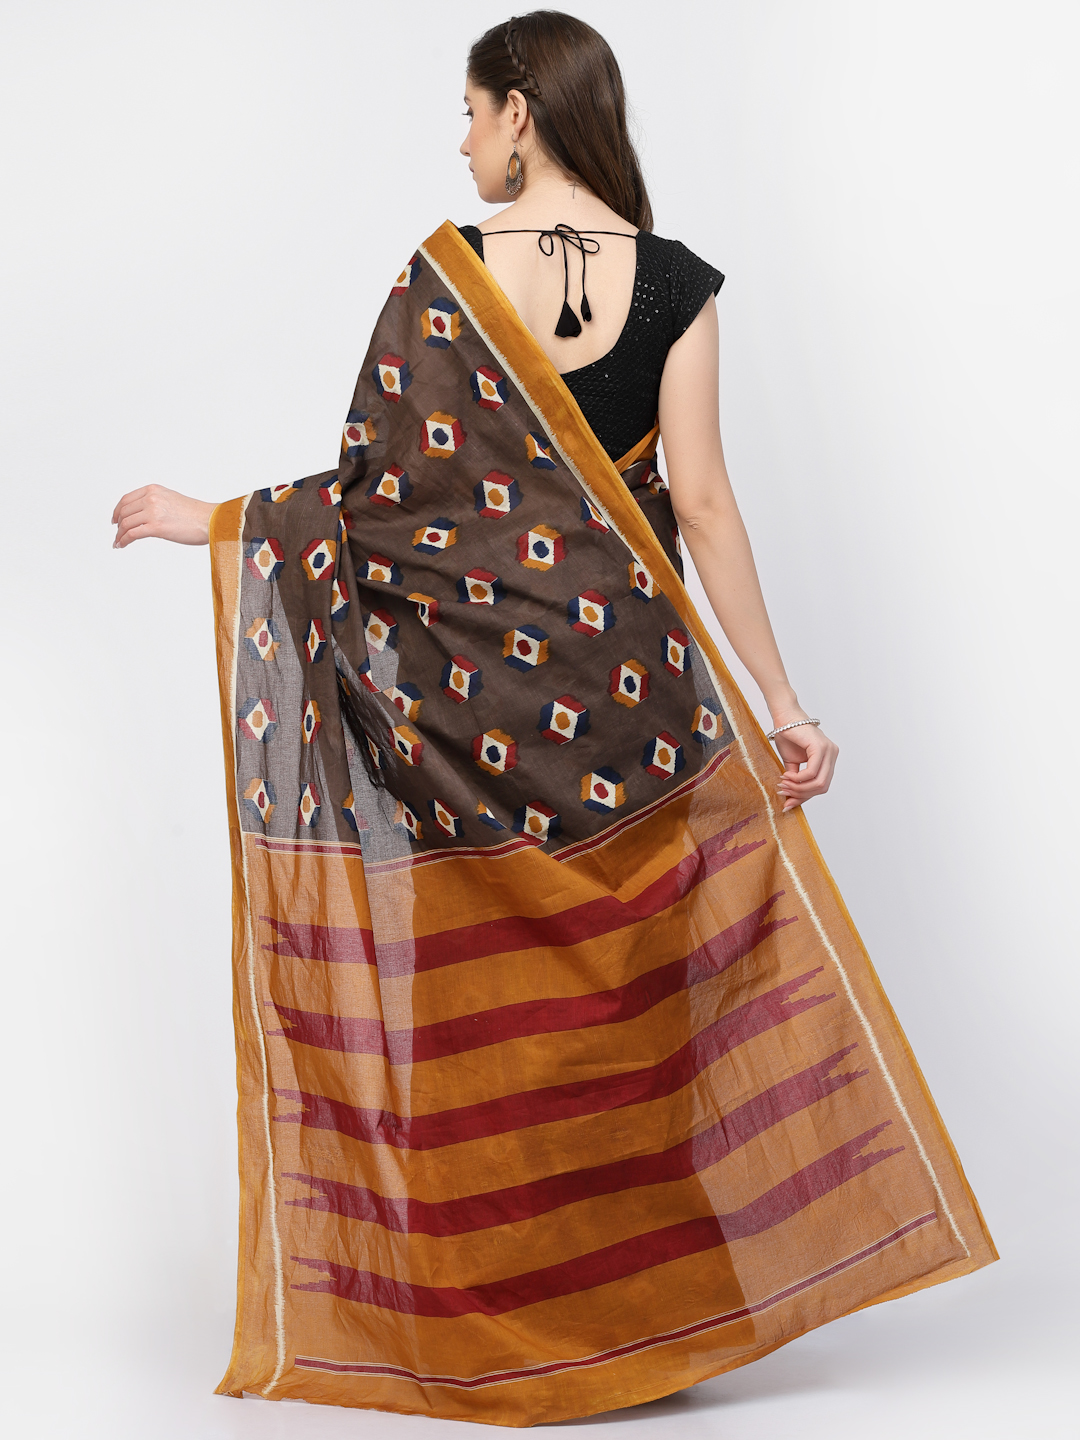 Women's Cotton Screen Printed Saree with Unstitched Blouse